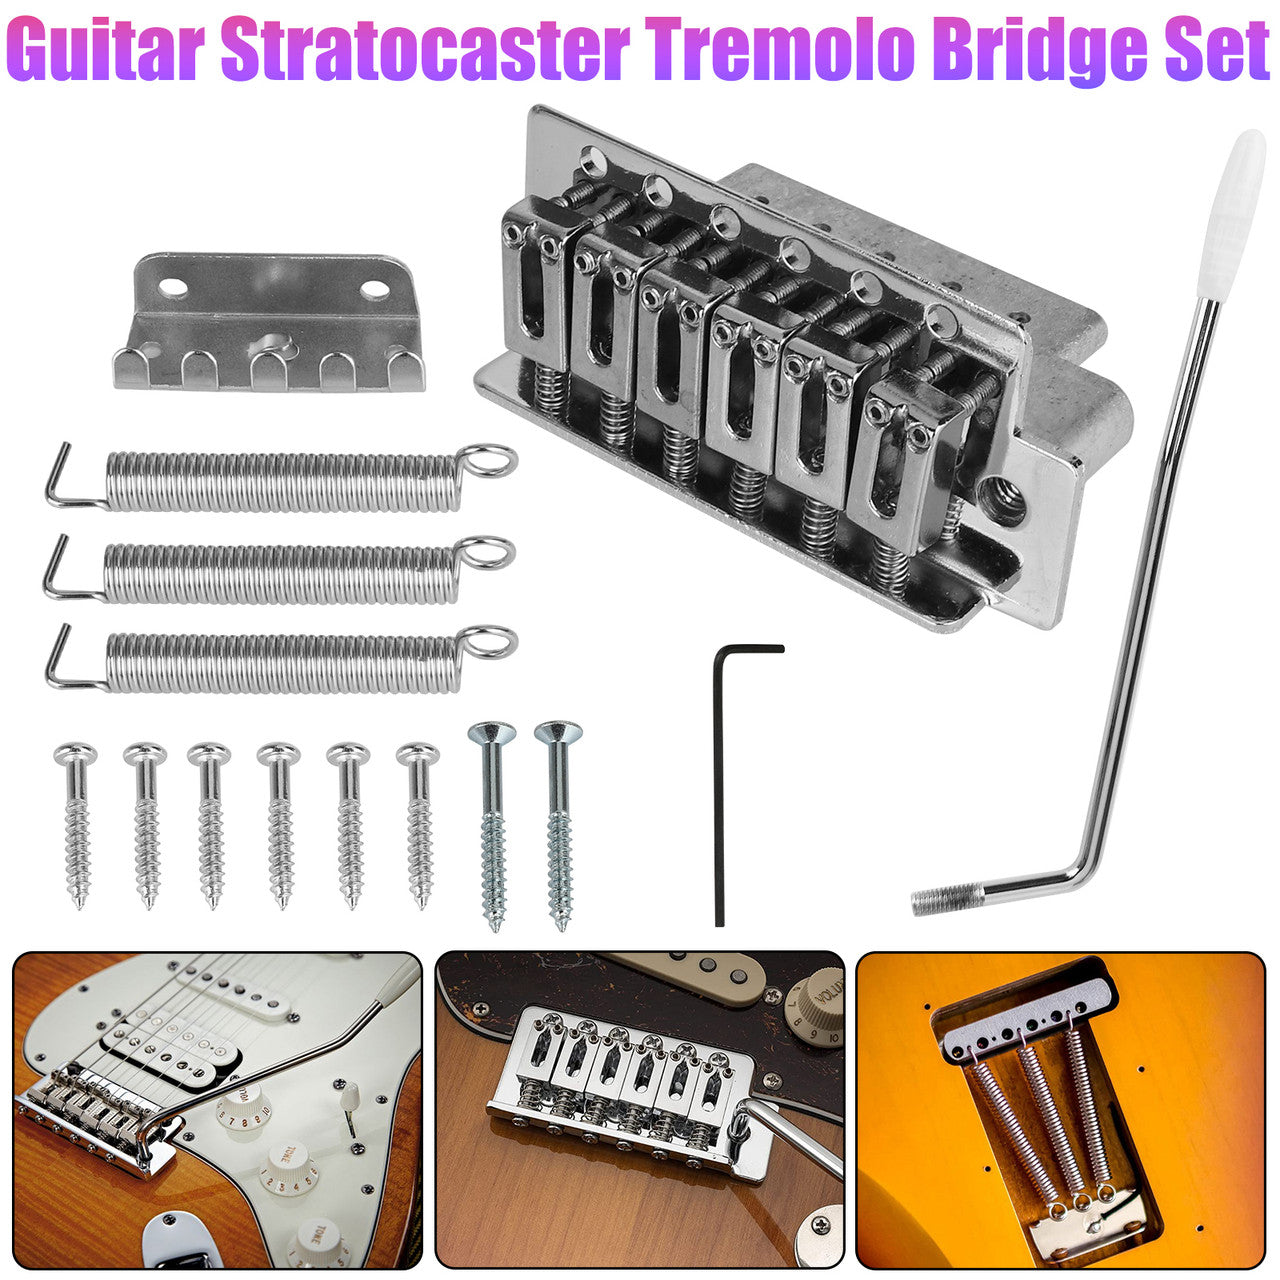 6 String Guitar Tremolo Bridge with Whammy Bar- for Fender Strat Squier Style Electric Guitar Chrome or Squier Style Electric Guitar